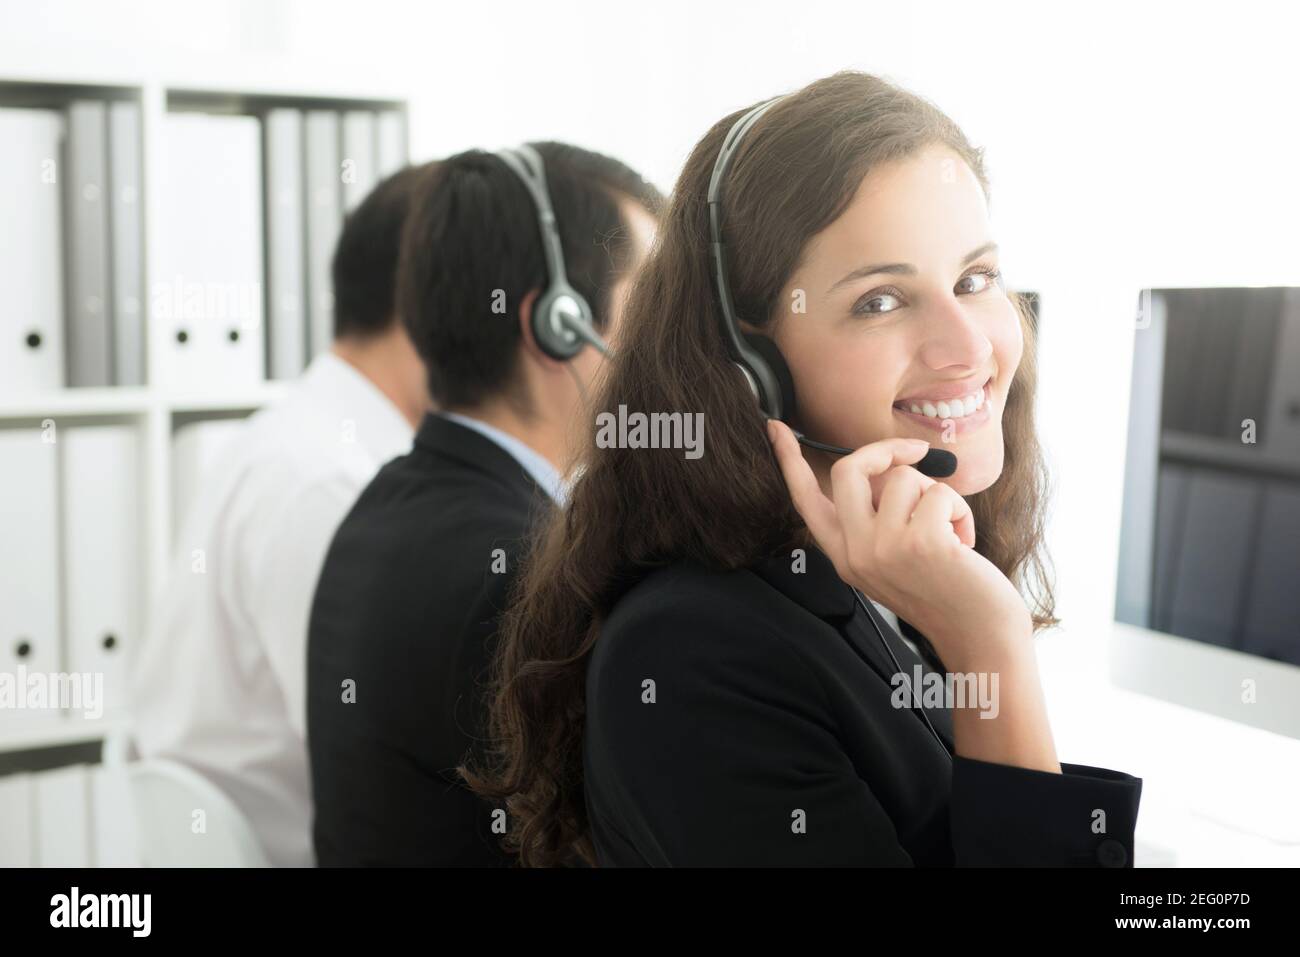 Beautiful smiling woman working in call center as an operator or customer service staff Stock Photo